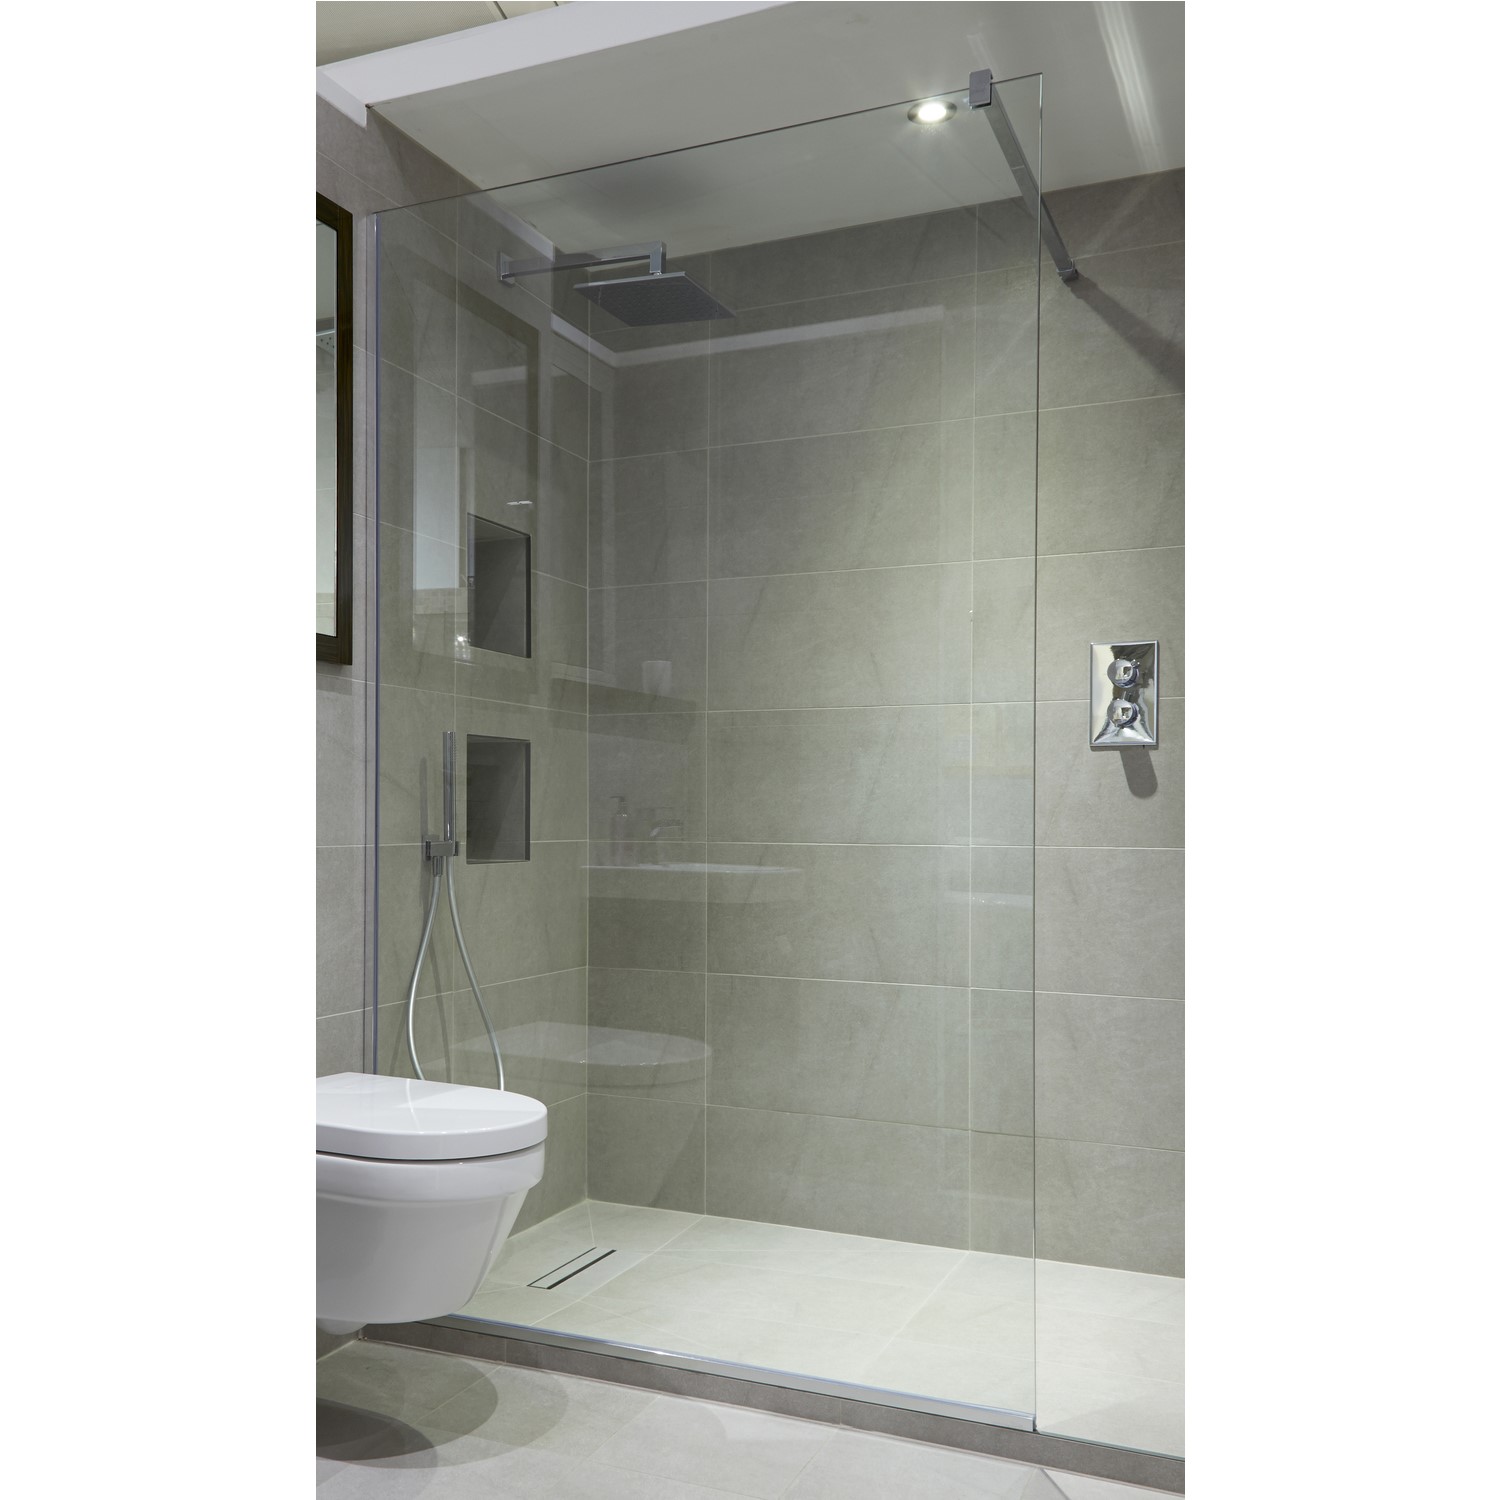 Chrome 700mm Wet Room Shower Screen with Wall Support Bar - Live Your Colour